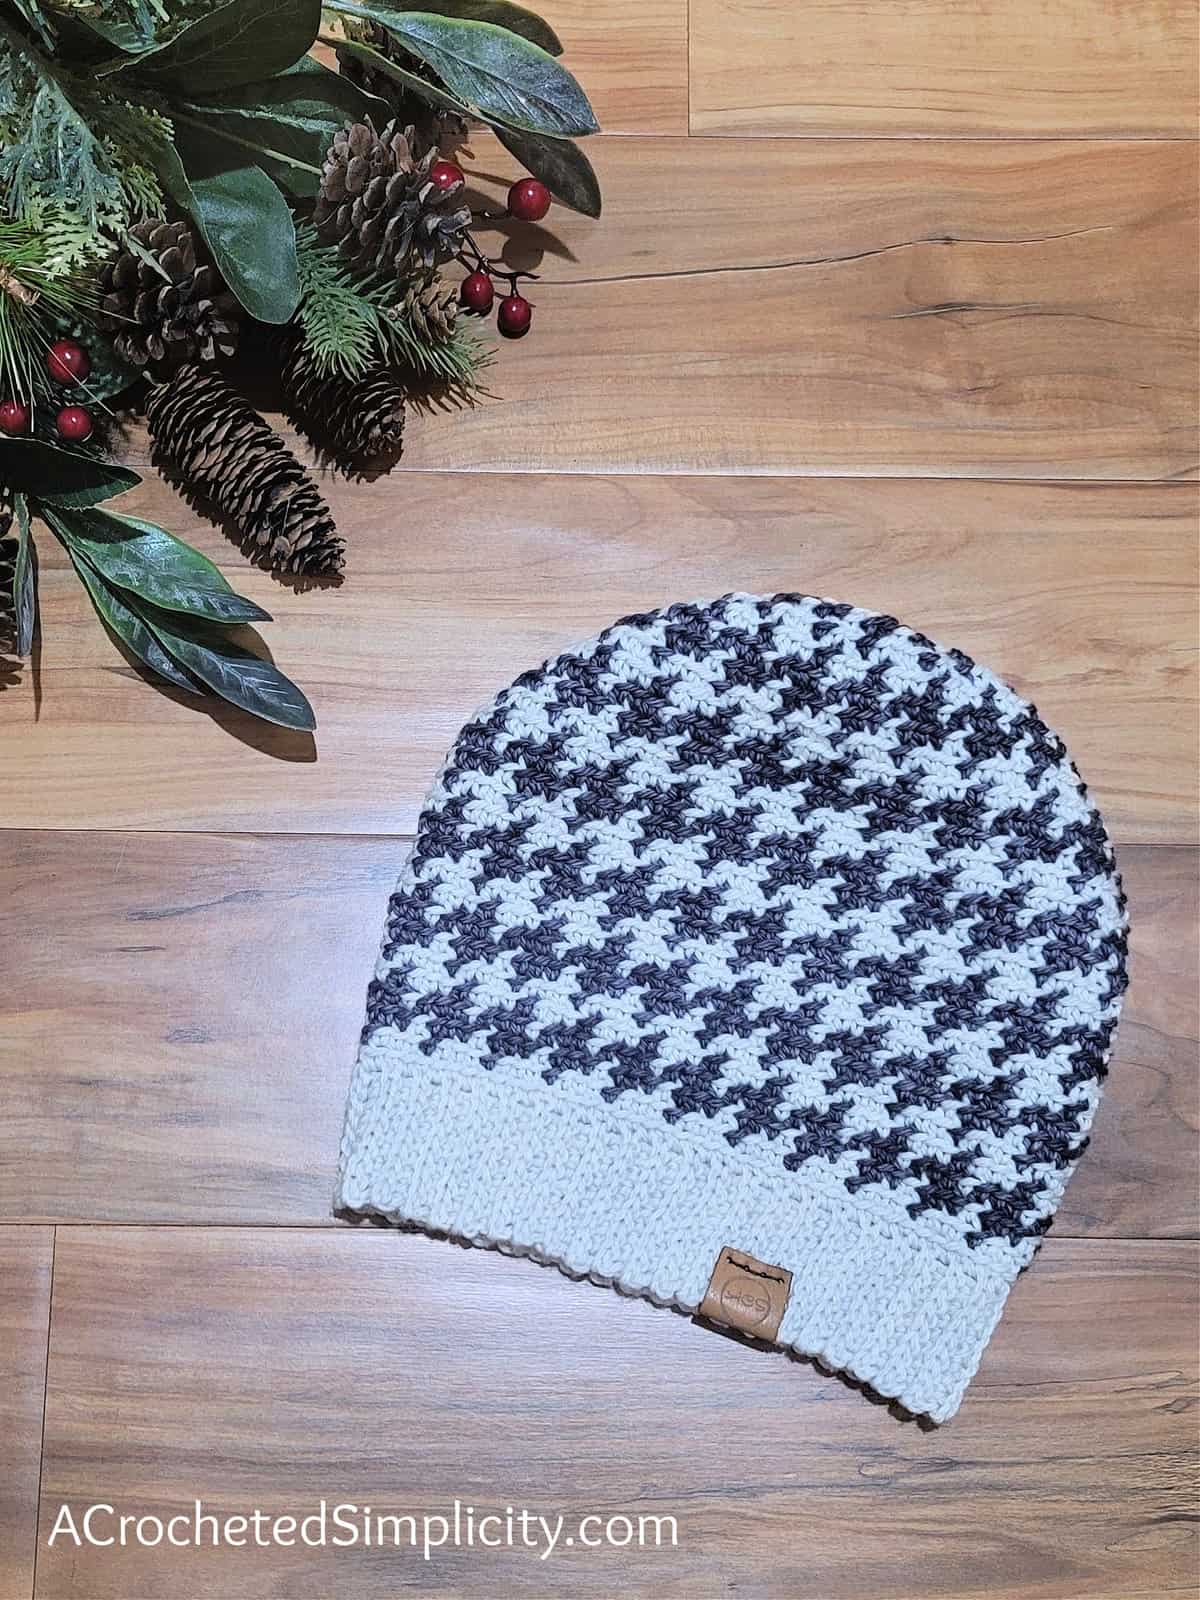 Free Crochet Hat Pattern - Houndstooth Slouch by A Crocheted Simplicity #crochethatpattern #crochethoundstooth #houndstooth #crochetpattern #freecrochetpattern #handmadslouch #crochetfashi